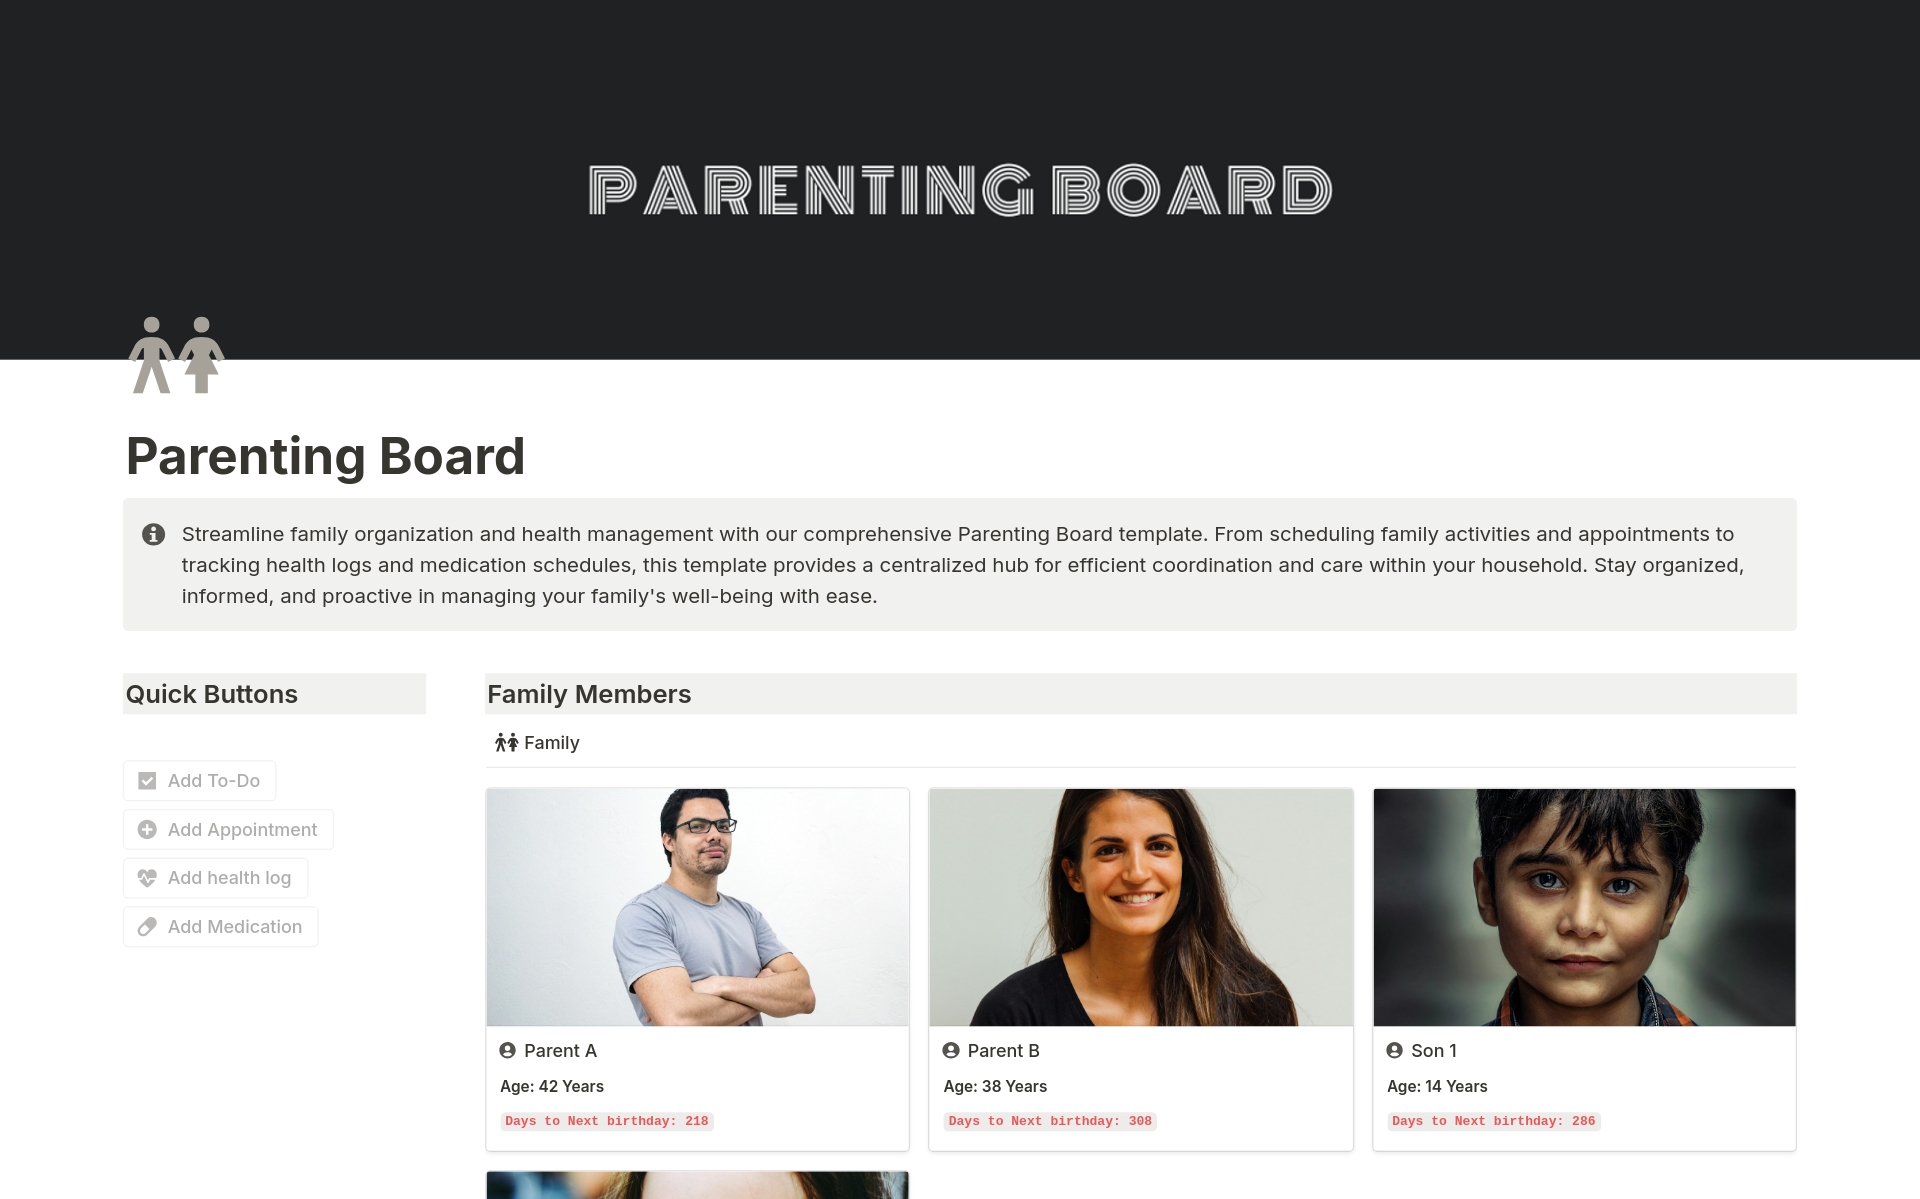 Streamline family organization and health management with our comprehensive Parenting Board template. From scheduling family activities and appointments to tracking health logs and medication schedules, this template provides a centralized hub for your household.